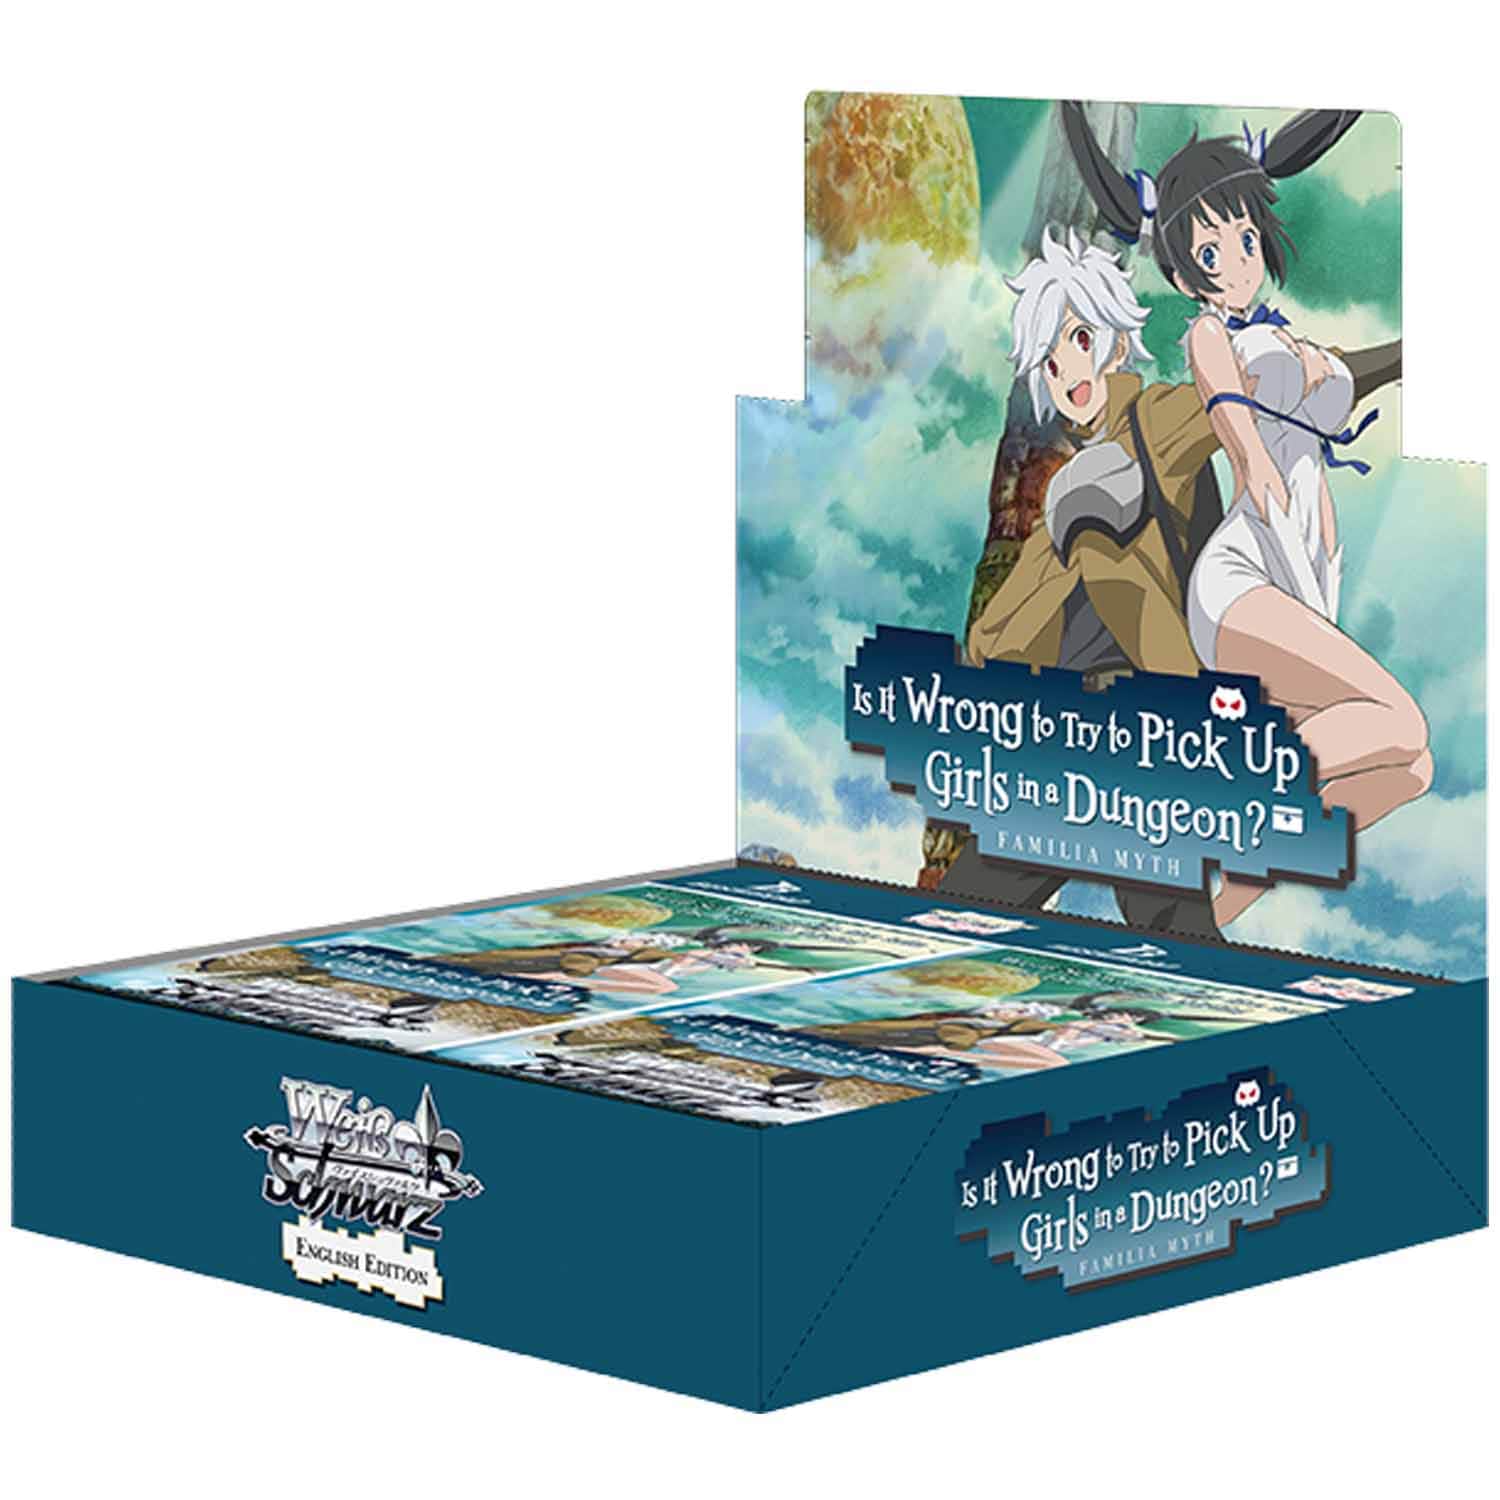 Is it Wrong to try to Pick Up Girls in a Dungeon Booster Display - 1st Edition - Weiss Schwarz TCG -